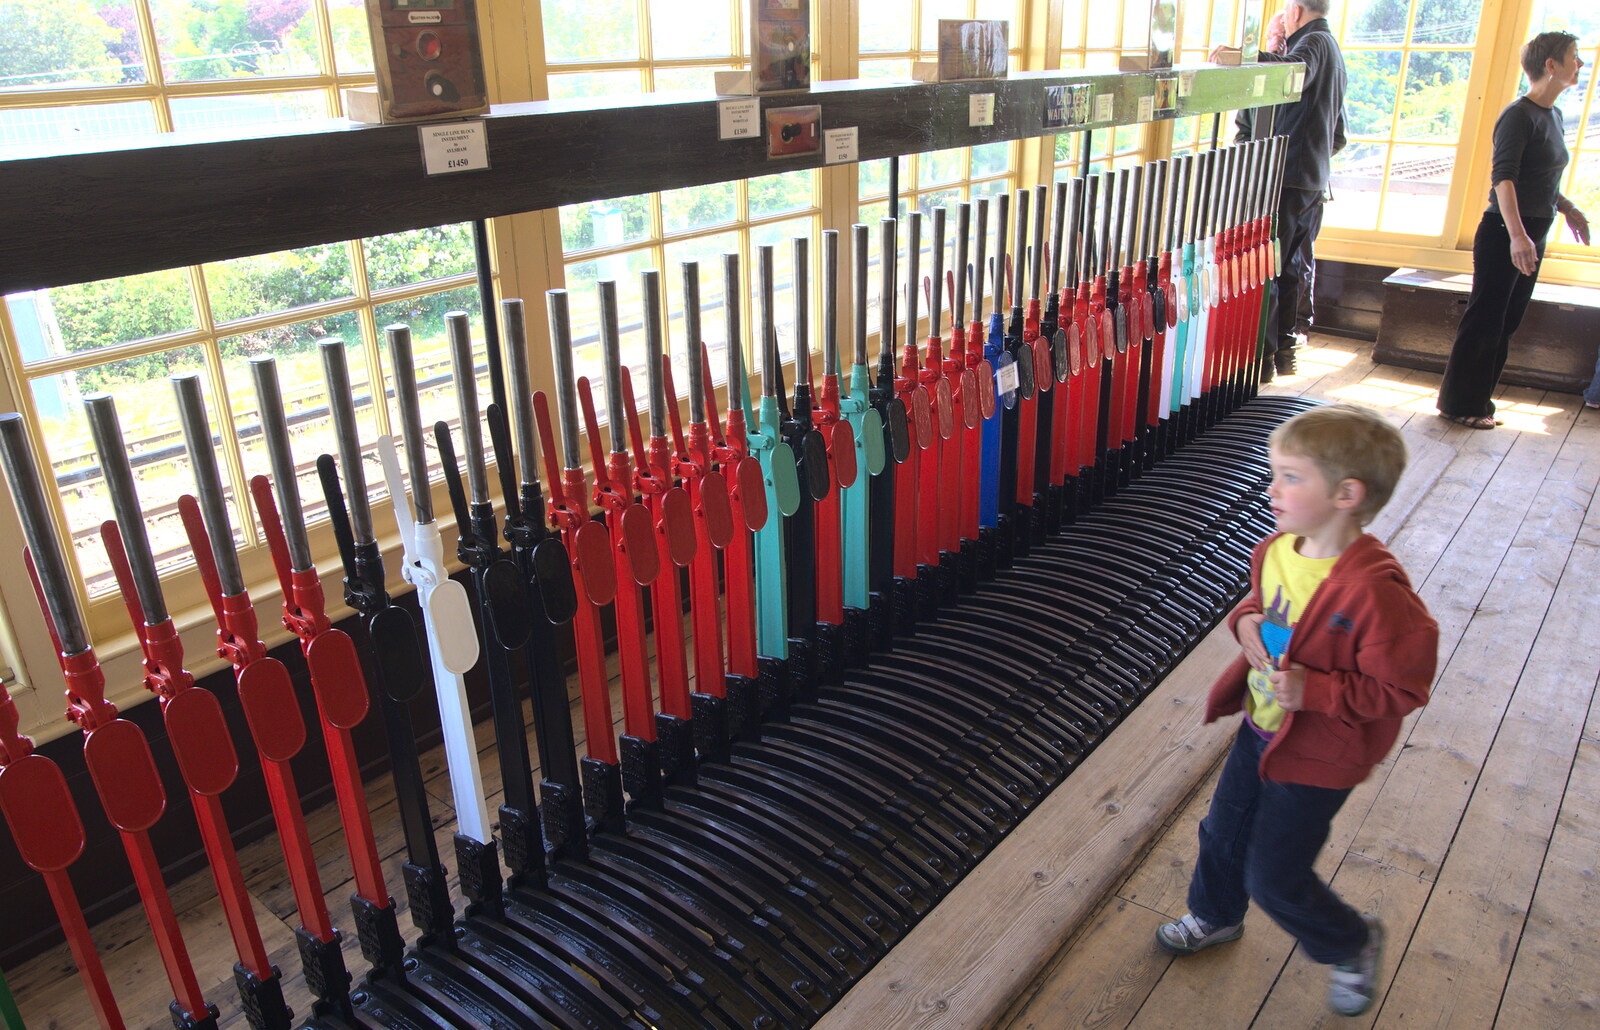 Fred looks at signal levers from The Bure Valley Railway, Aylsham, Norfolk - 26th May 2013